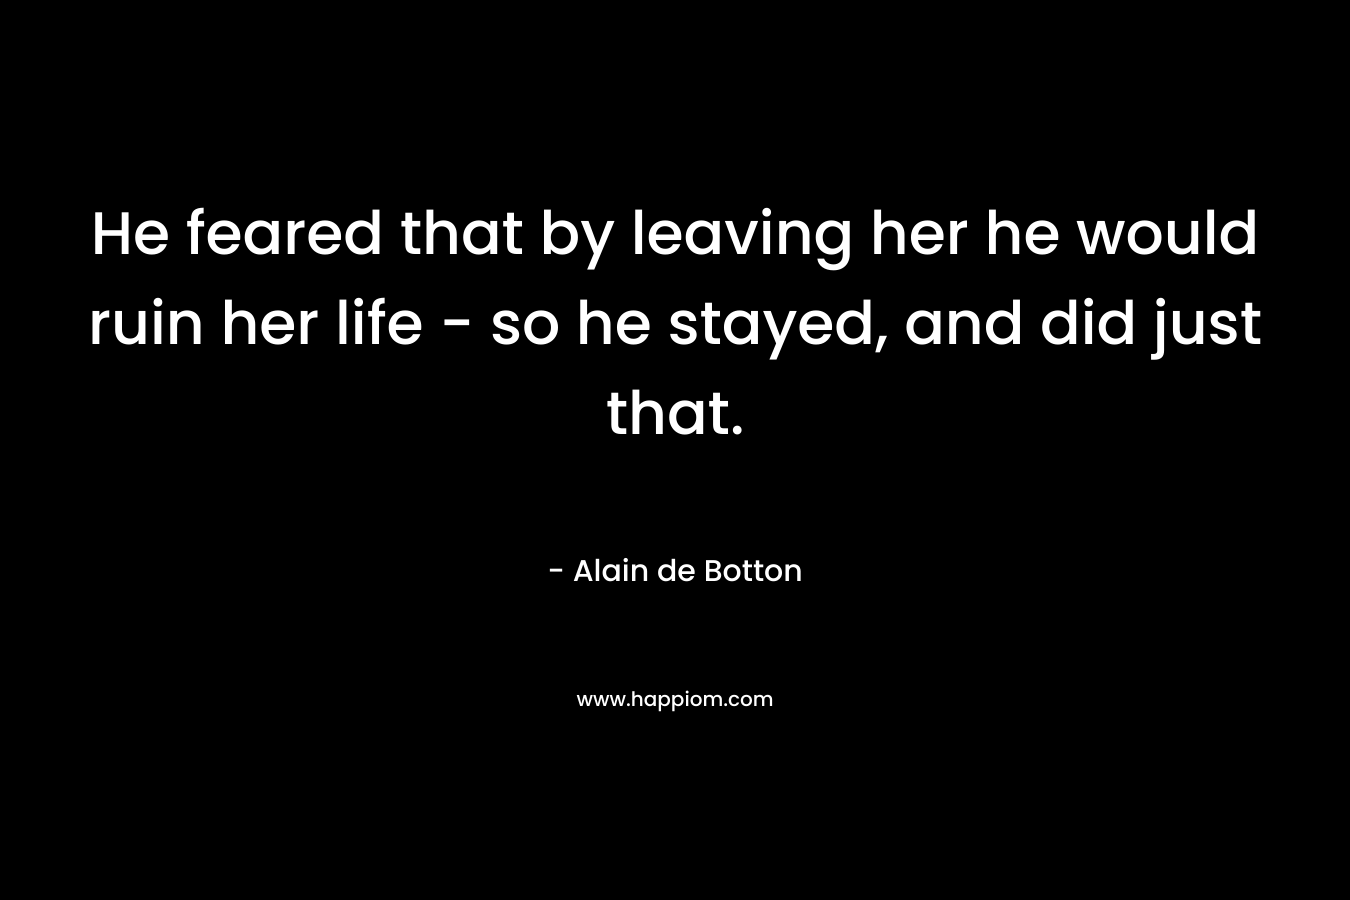 He feared that by leaving her he would ruin her life – so he stayed, and did just that. – Alain de Botton